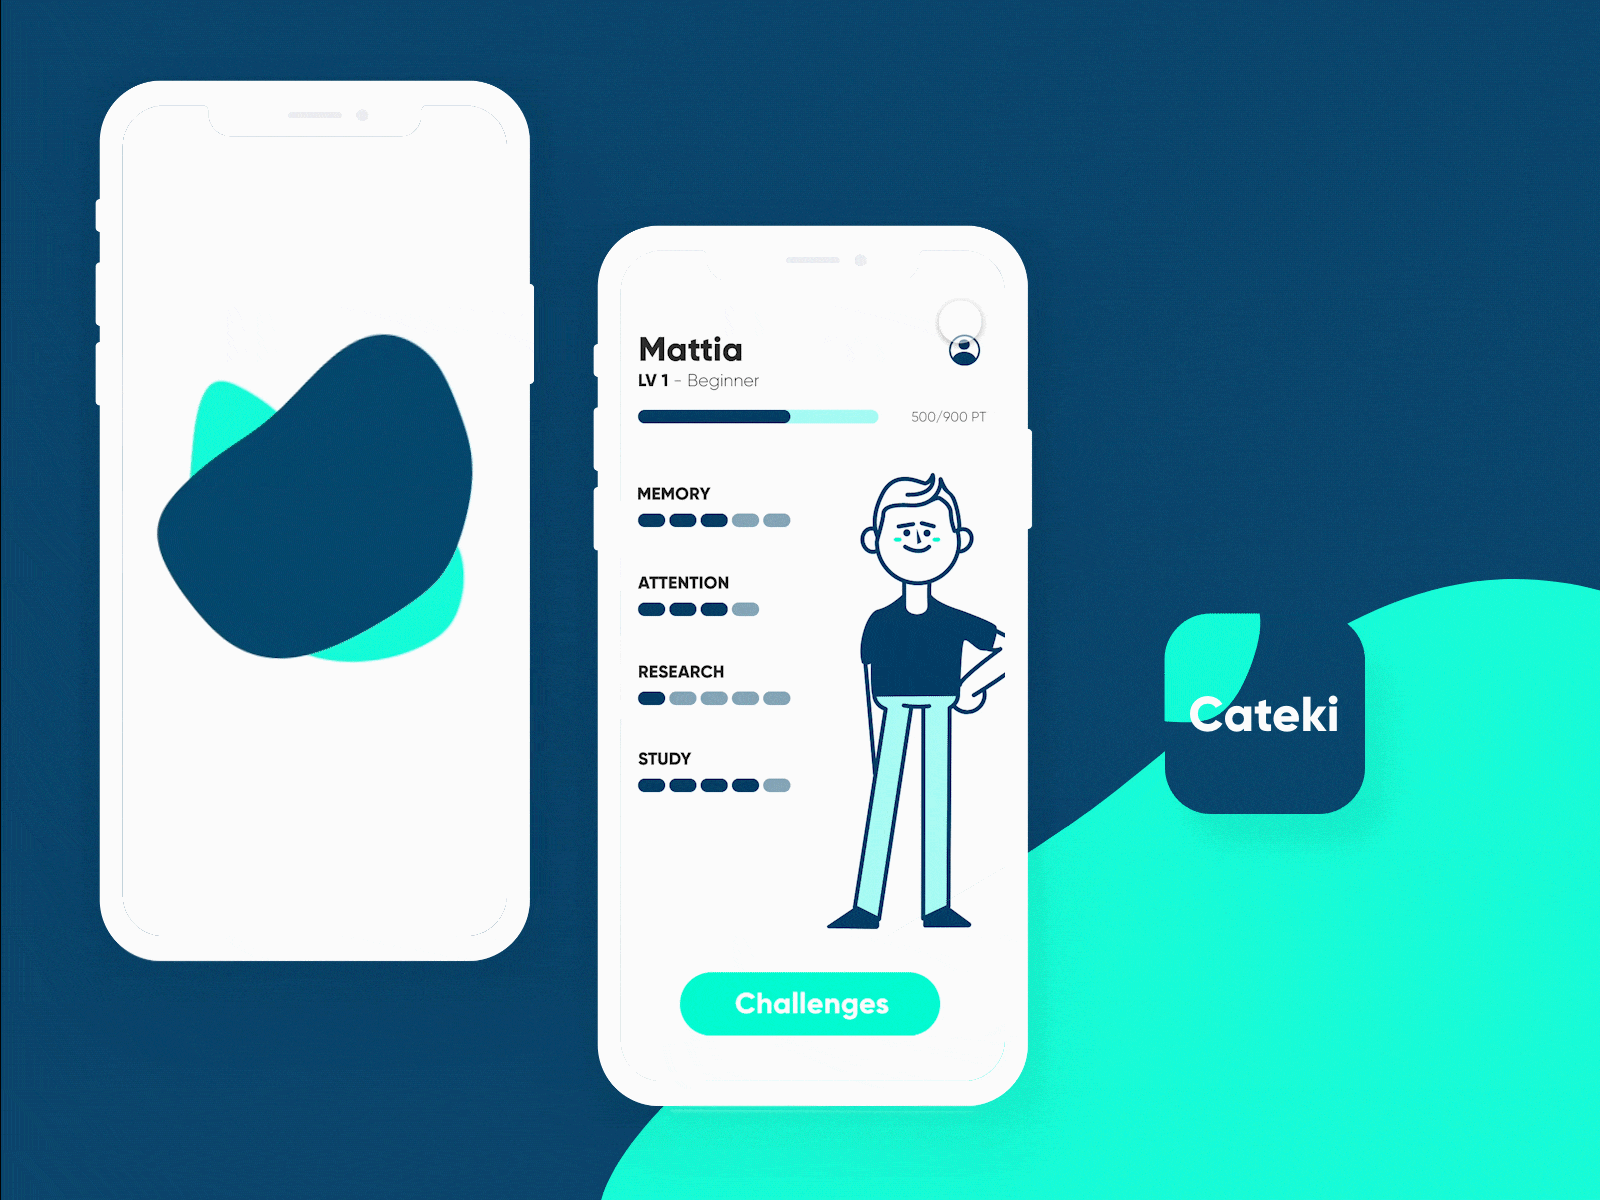 Cateki - Catechism Gamified App appicon avatar catechism catechism app challenges church church design gamification gamified kids kids app level up onboarding screen onboarding ui priest todos ui ux ux research uxdesign